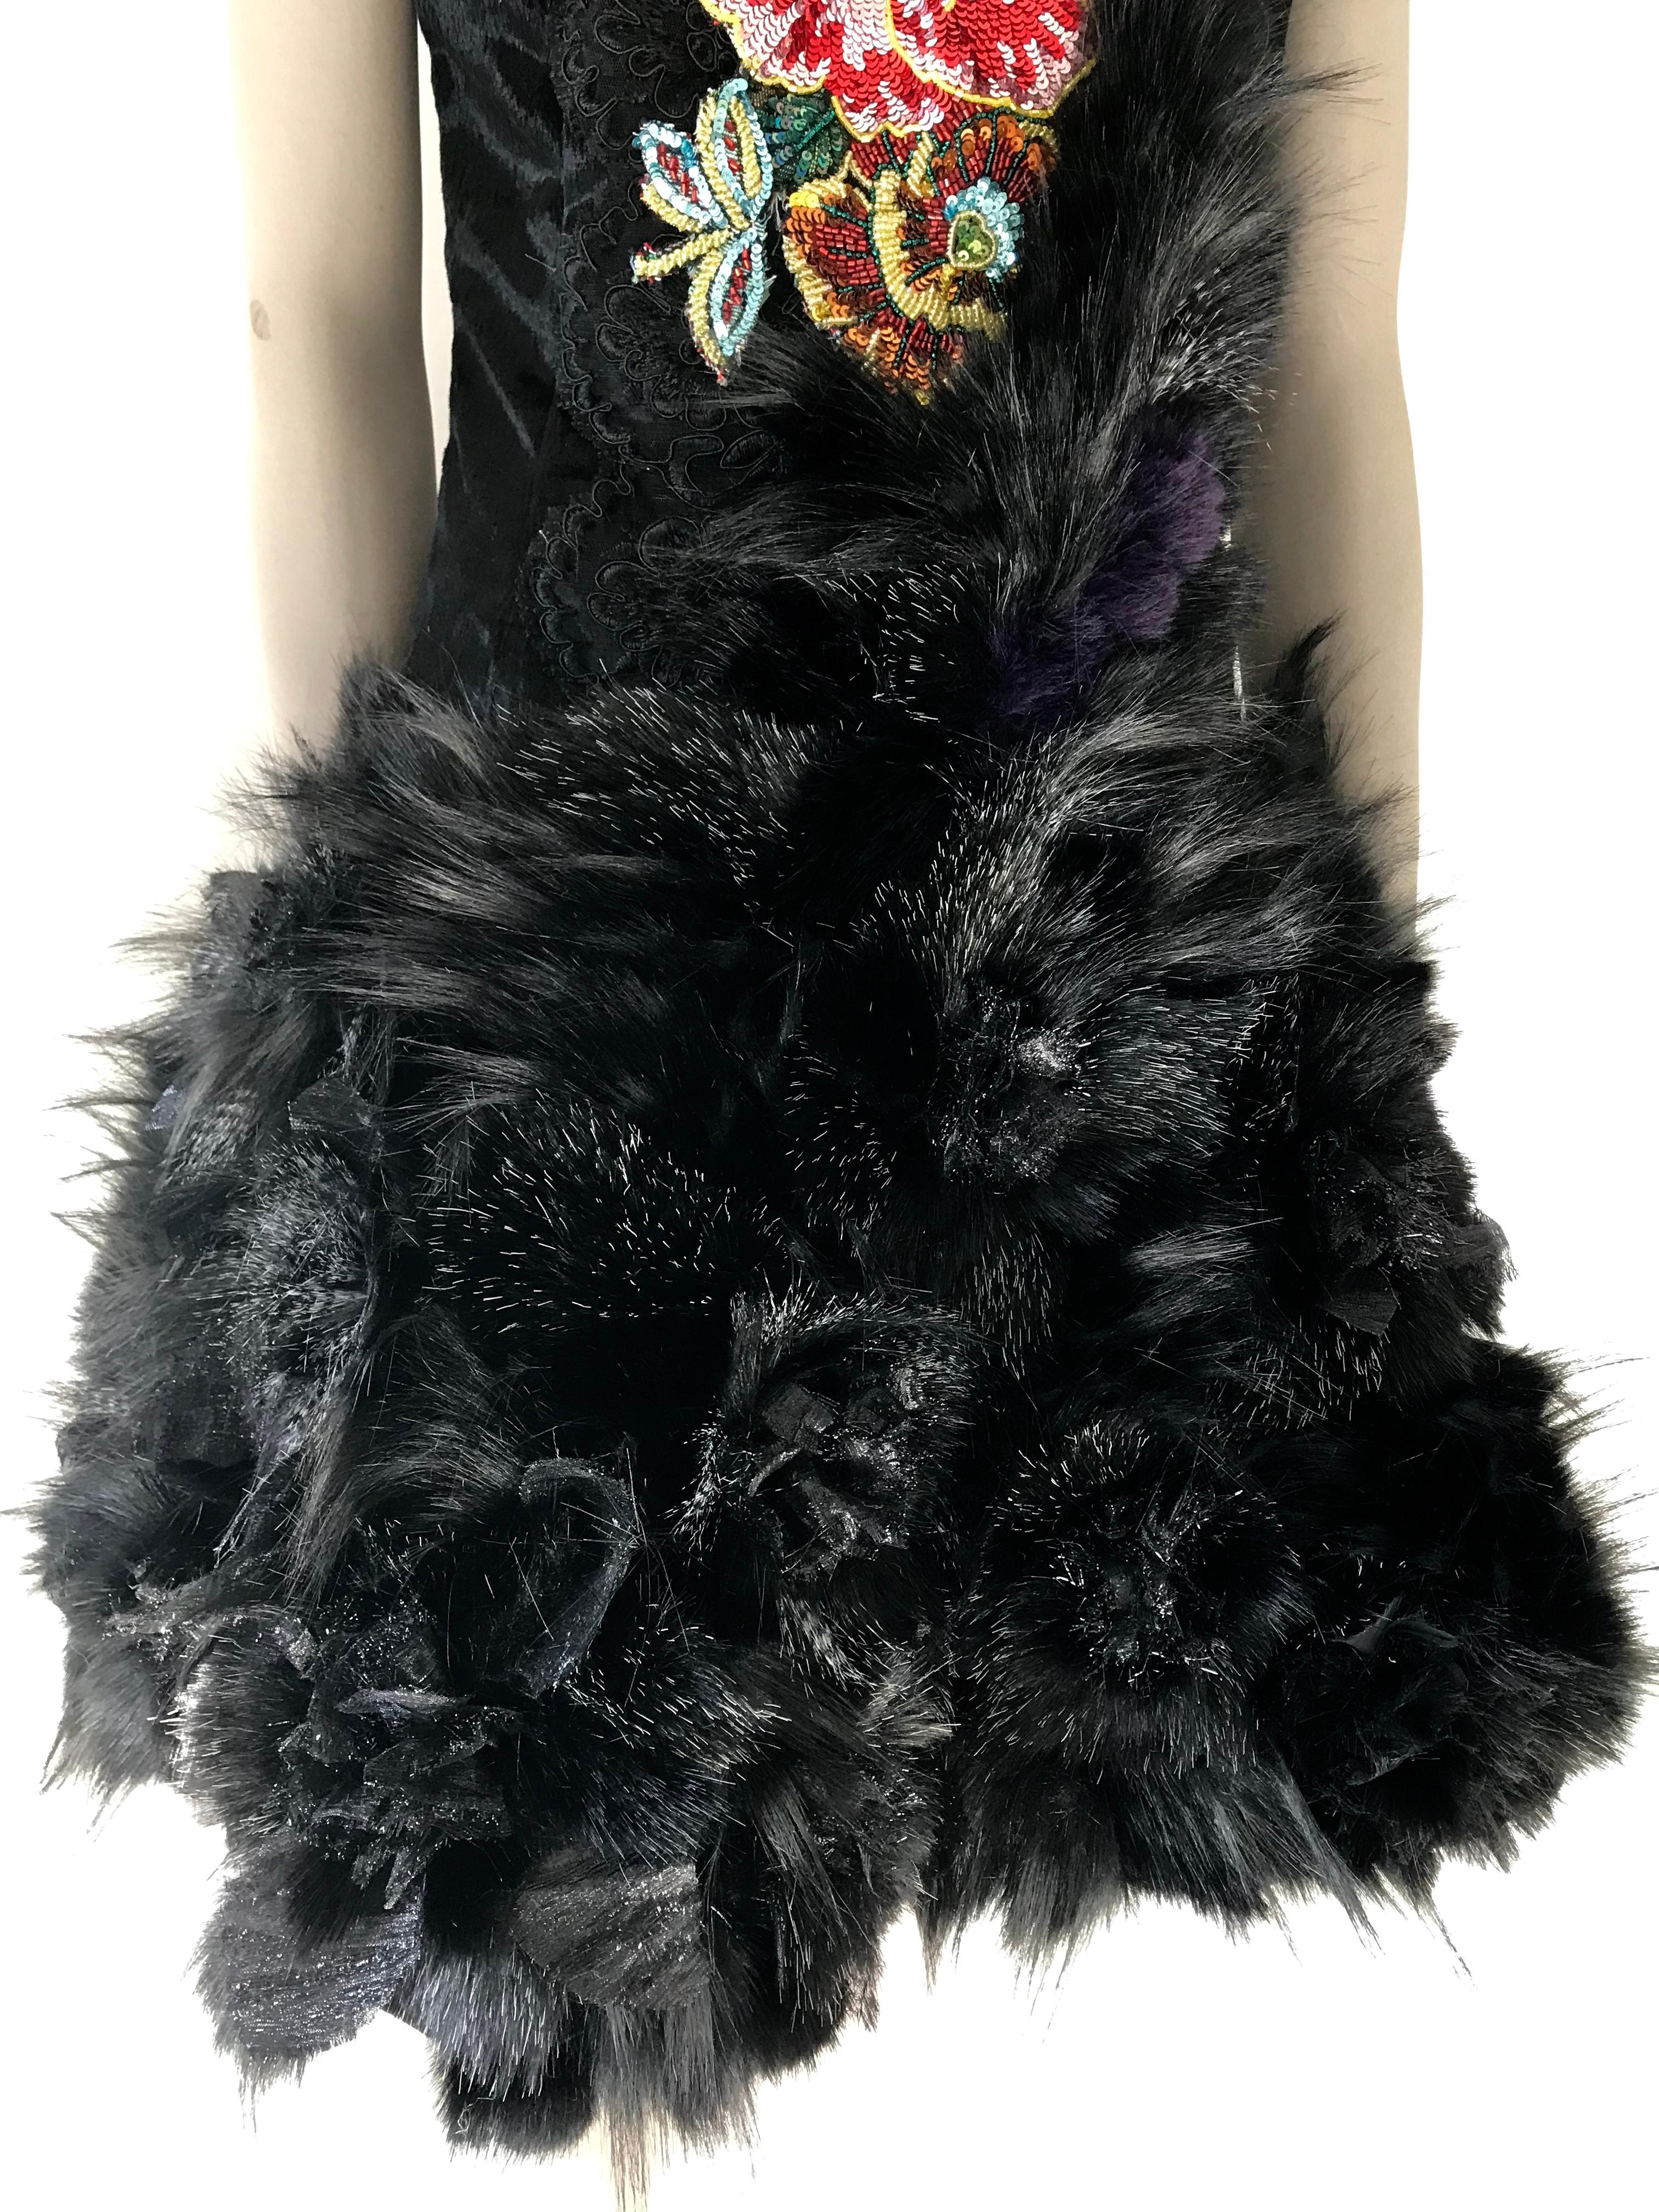 The Rose Pelush black faux fur dress with three dimensional flowers is a one of a kind exclusive Couture piece. Featuring the best quality man made pelage, this extraordinary fur free dress is a beautiful replica of the fox, mink, chinchilla and